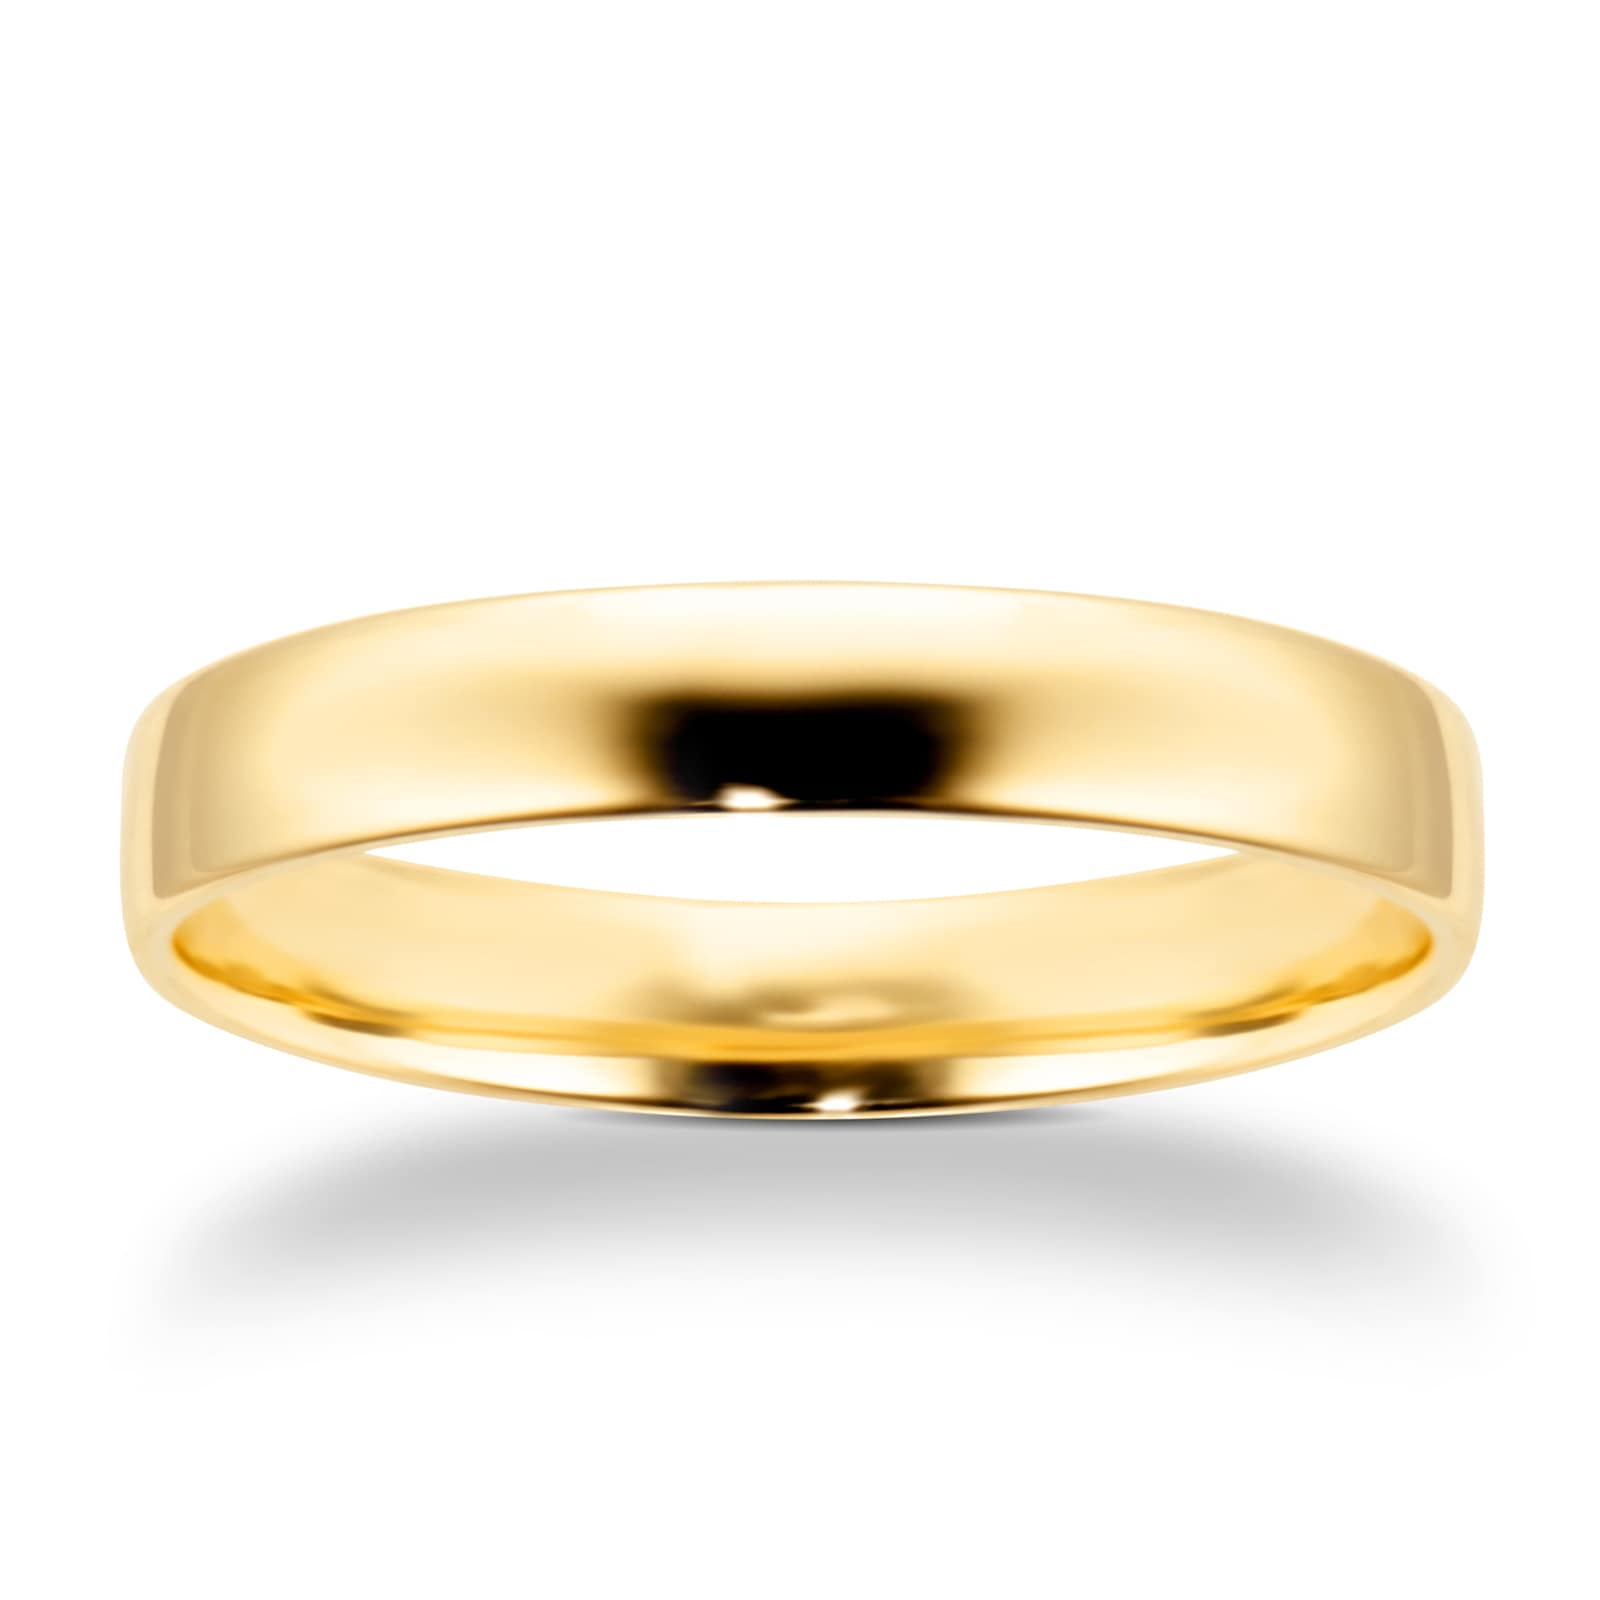 4mm Slight Court Heavy Wedding Ring In 18 Carat Yellow Gold - Ring Size P